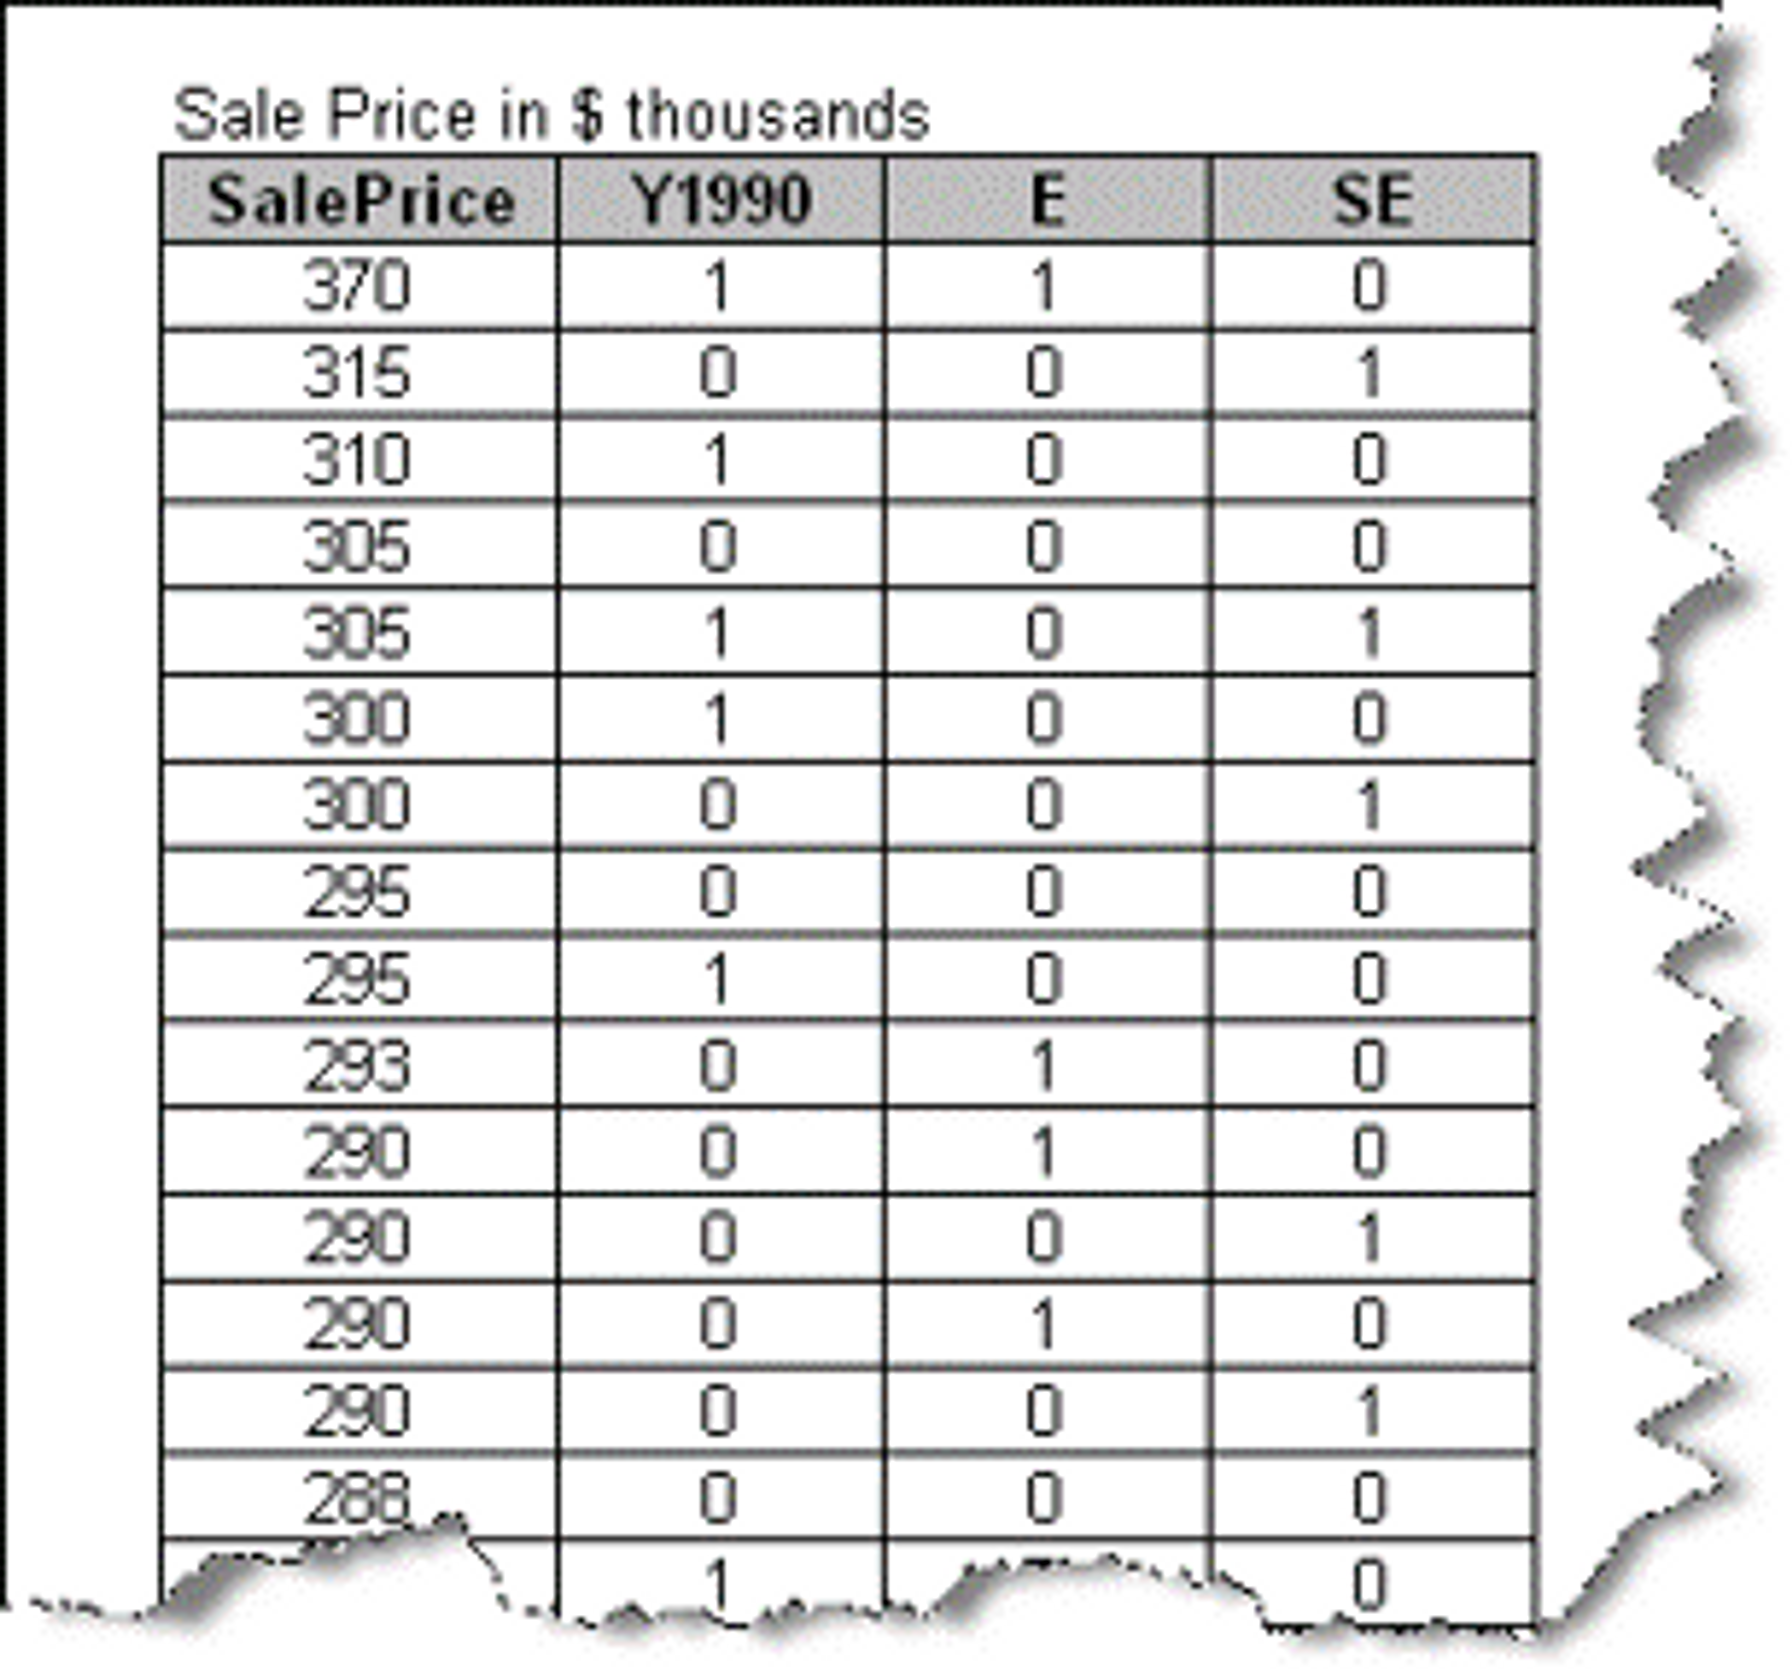 Table with the sale price in thousands